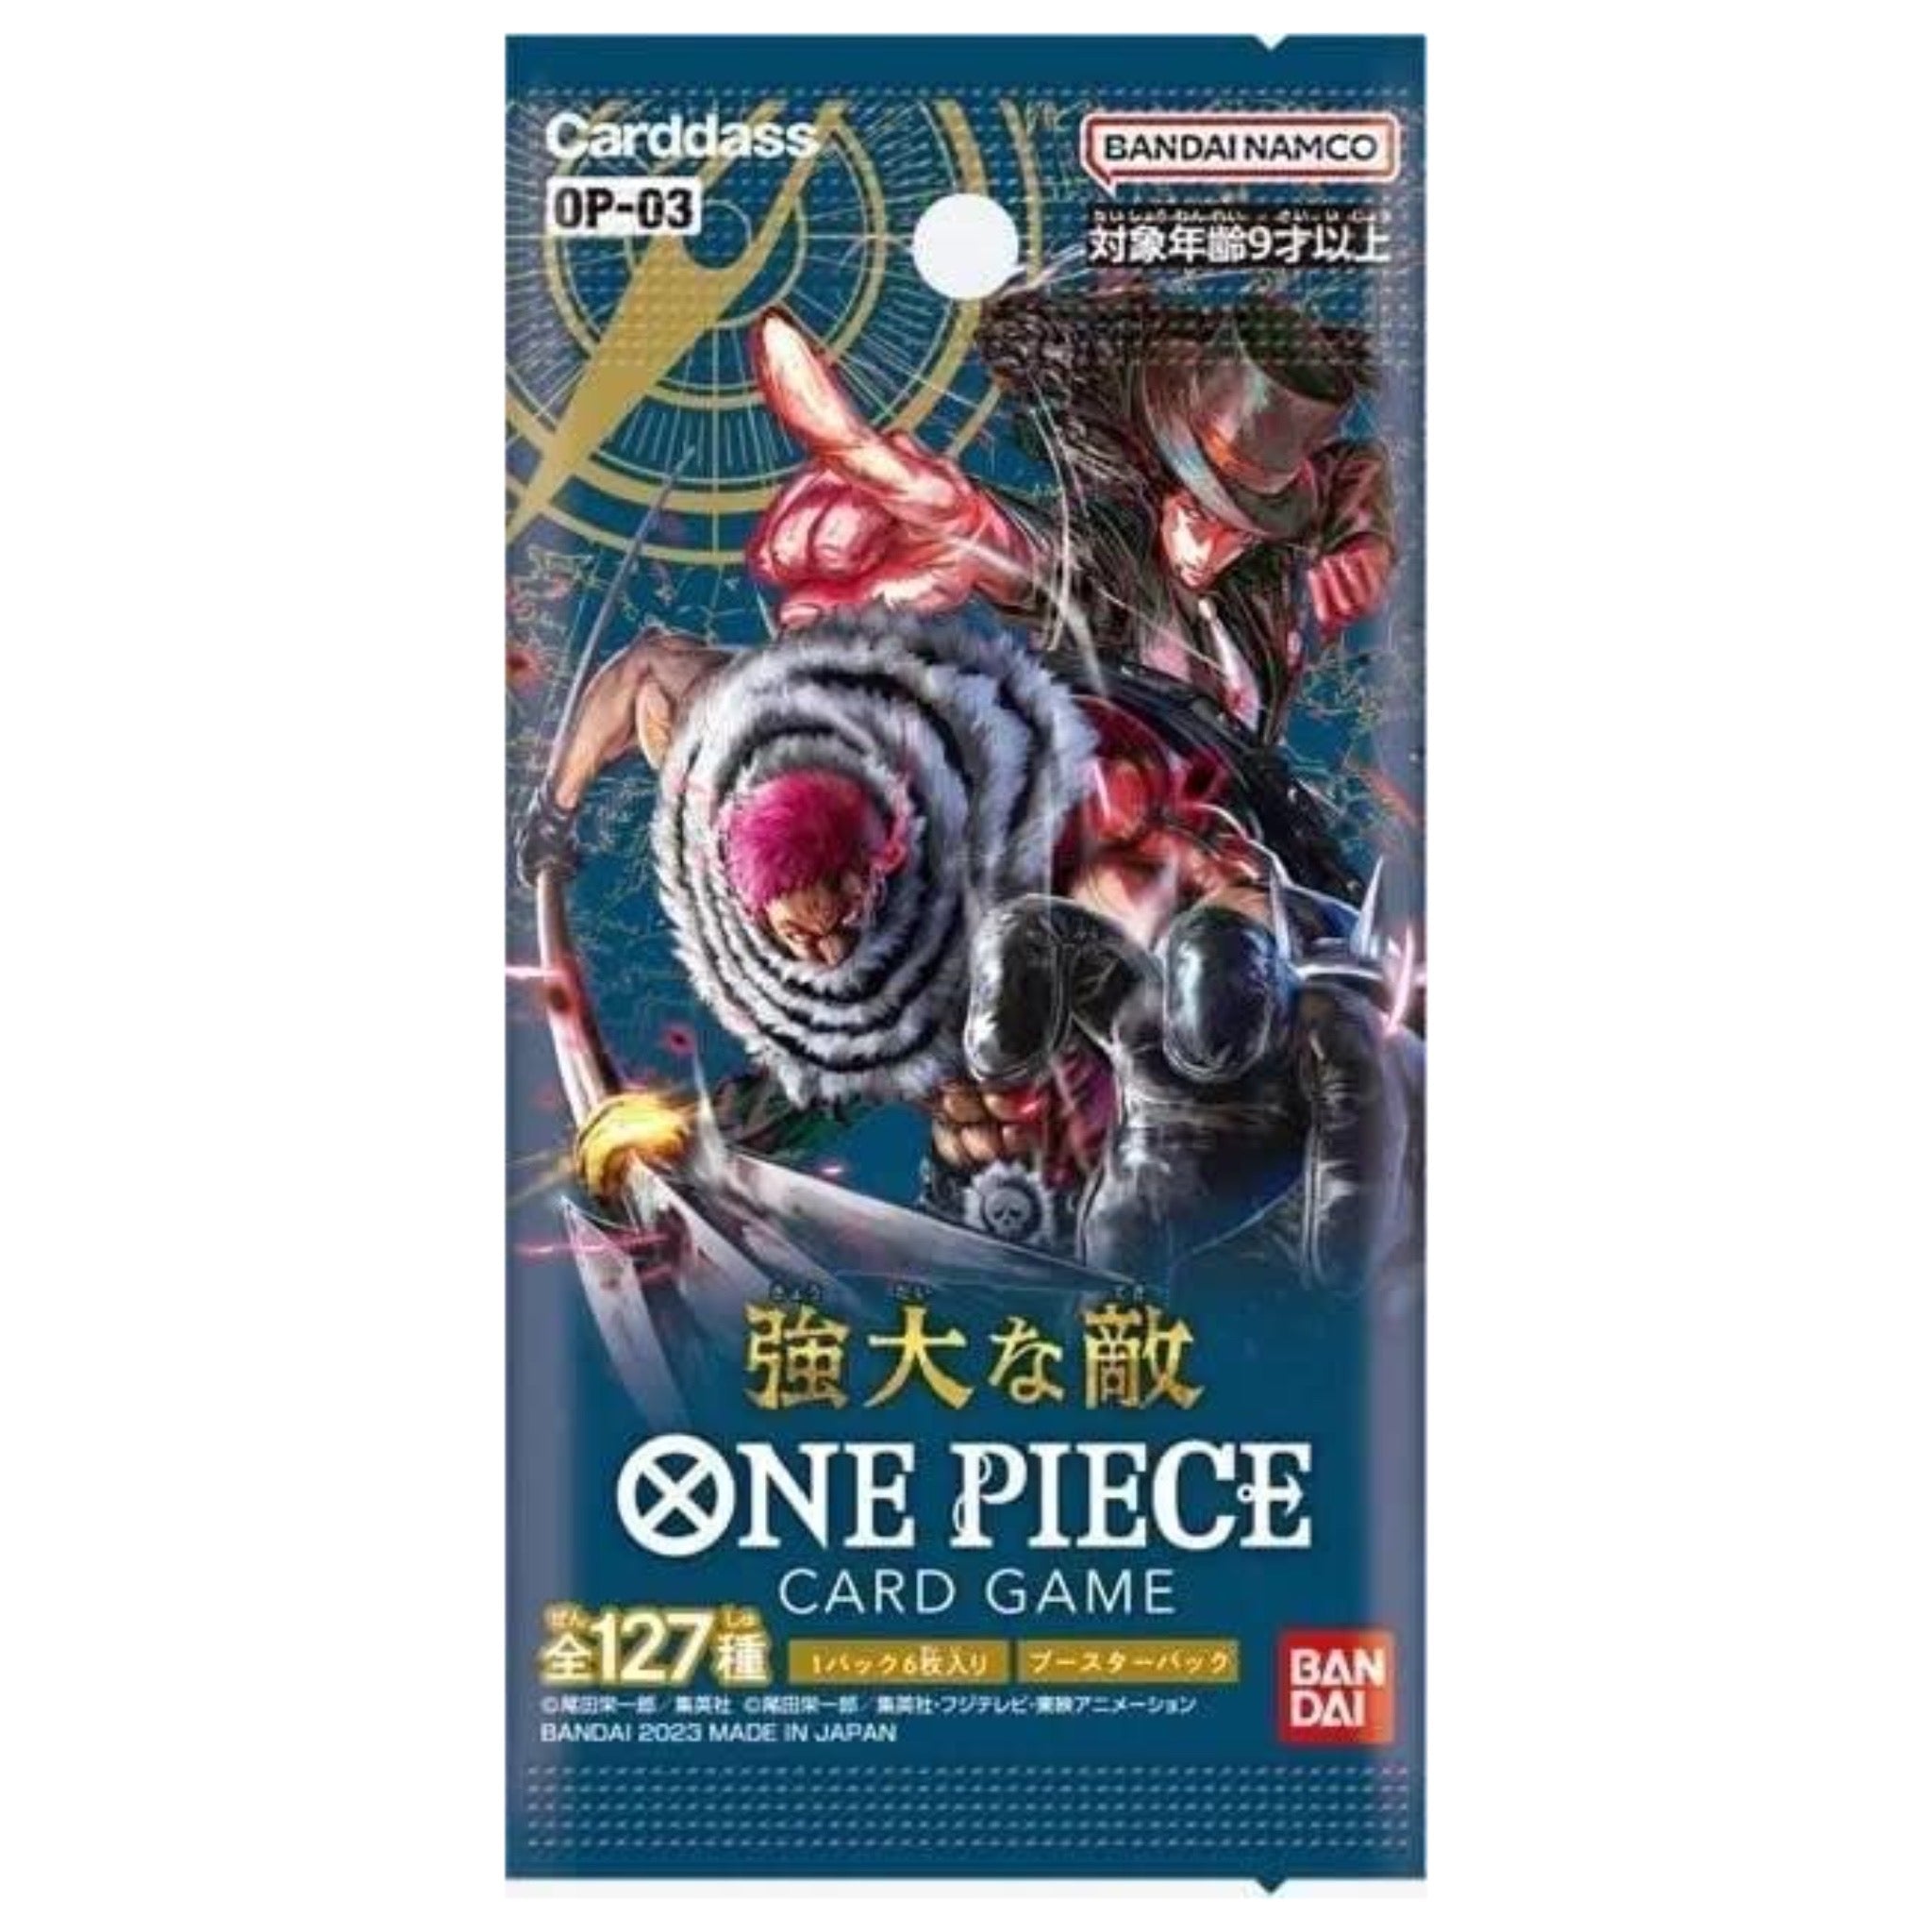 [OP-03] ONE PIECE CARD GAME Booster Pack ｢Pillars of Strength｣ Booster